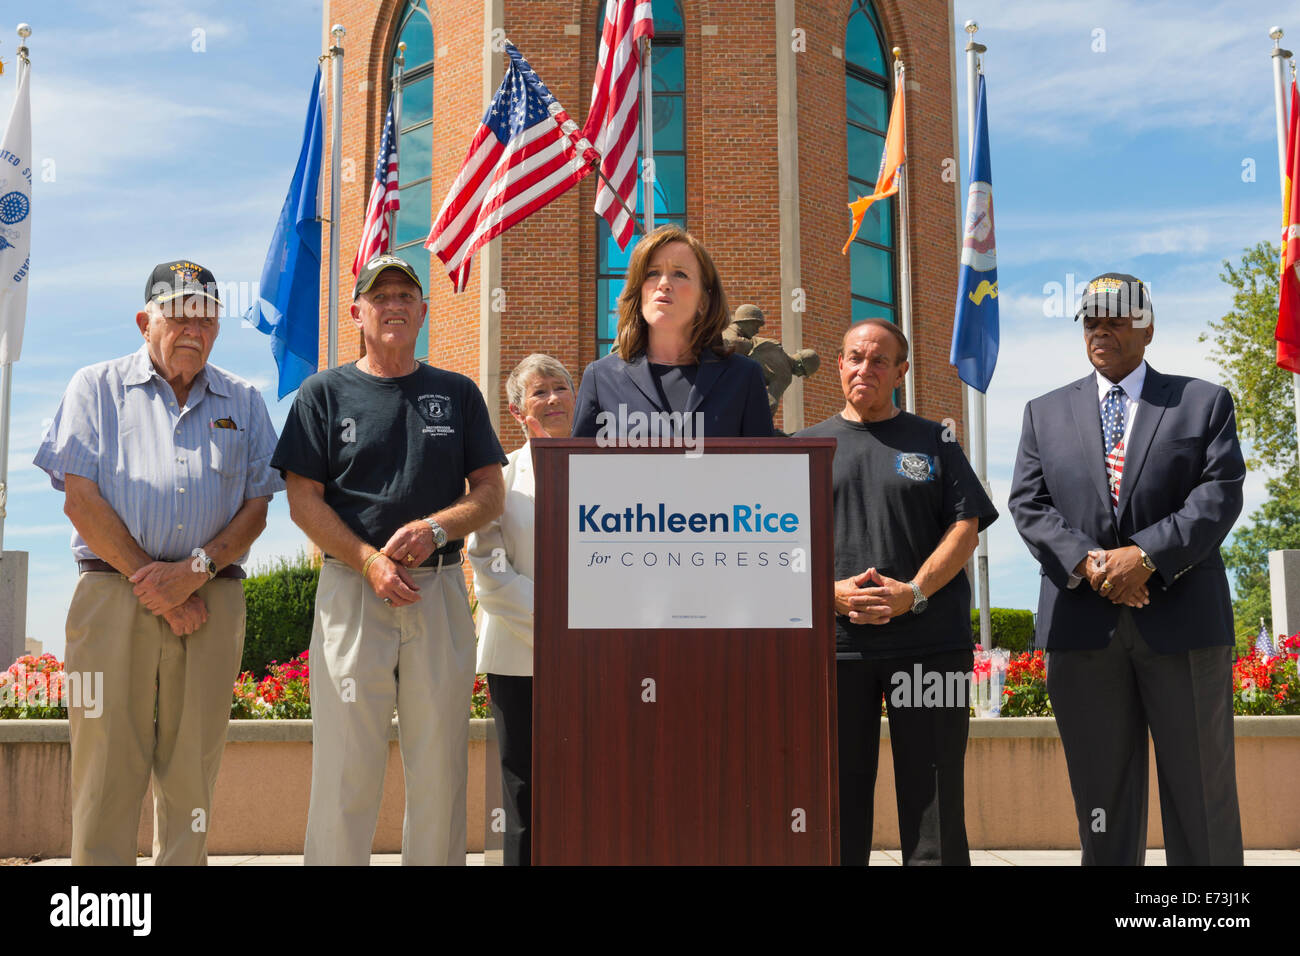 East Meadow, New York, USA. 3rd September, 2014.  KATHLEEN RICE, at podium, Democratic congressional candidate (NY-04), releases a whitepaper on veterans policy and announces formation of her campaign's Veterans Advisory Committee, at Veterans Memorial at Eisenhower Park, after touring Northport VA Medical Center with outgoing Rep. CAROLYN MCCARTHY (in white jacket). Congresswoman McCarthy and 4 committee members joined Rice at the press conference: PAUL ZYDOR, (in blue shirt) of Merrick, U.S. Navy, Korean War Veteran; PAT YNGSTROM, (in black T-shirt and cap) of Merrick, U.S. © Ann E Parry/Ala Stock Photo